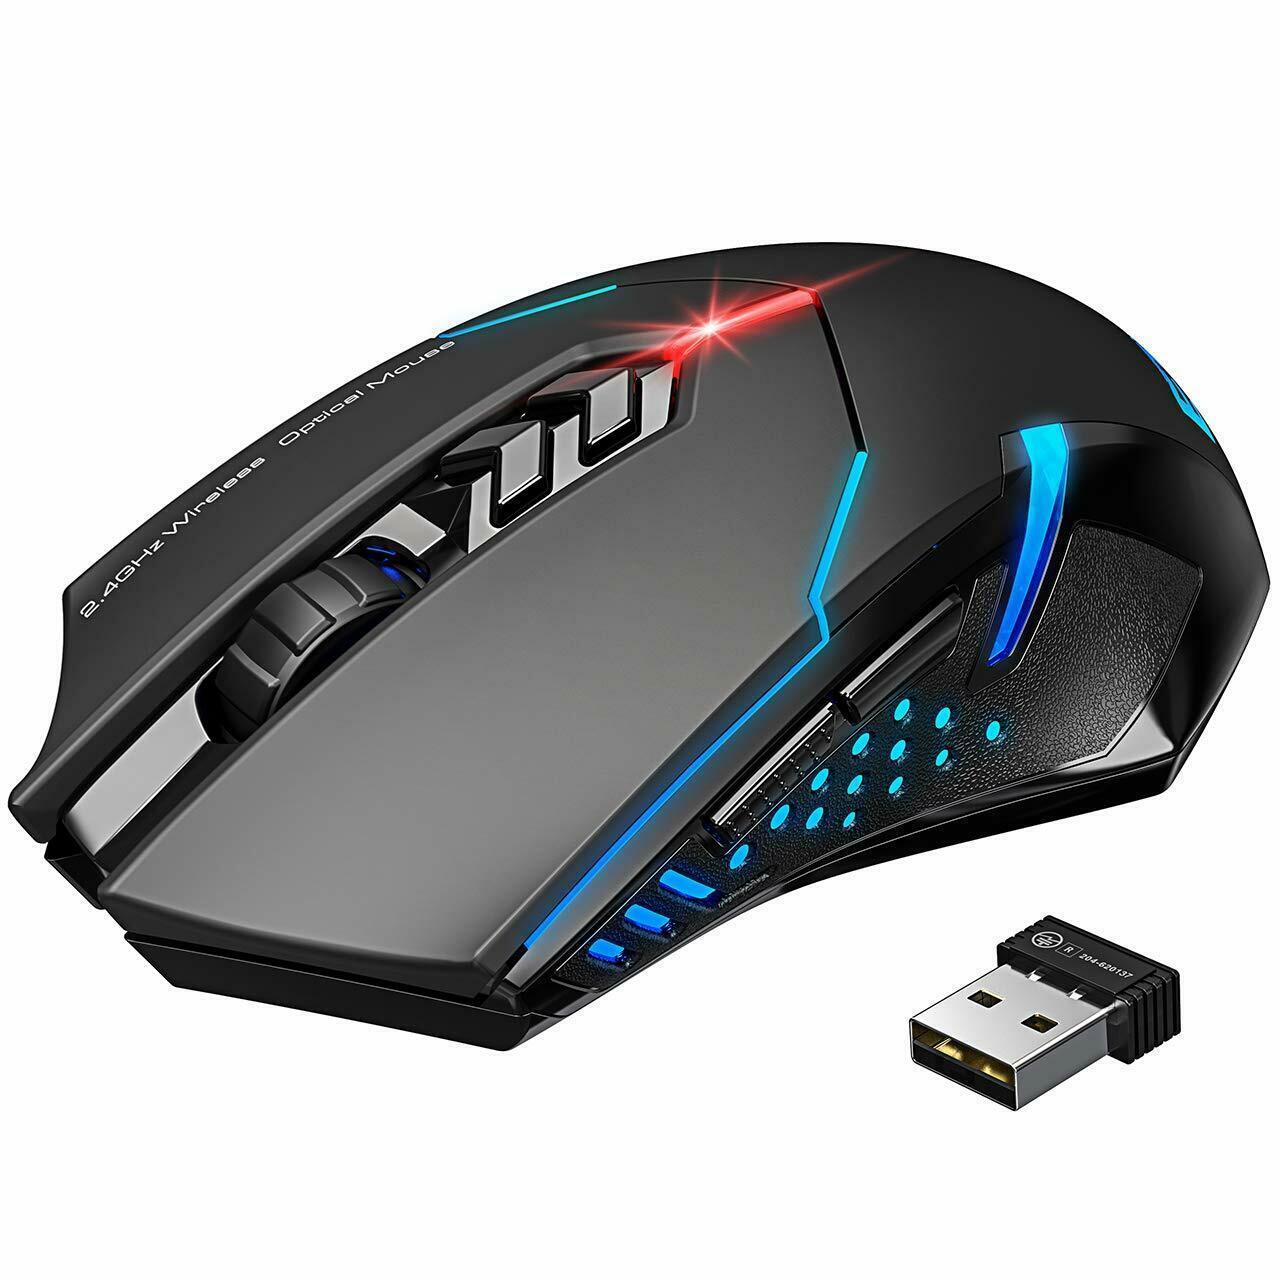 2.4GHz Wireless Gaming Mouse Optical Quiet Mice For Computer PC Laptop